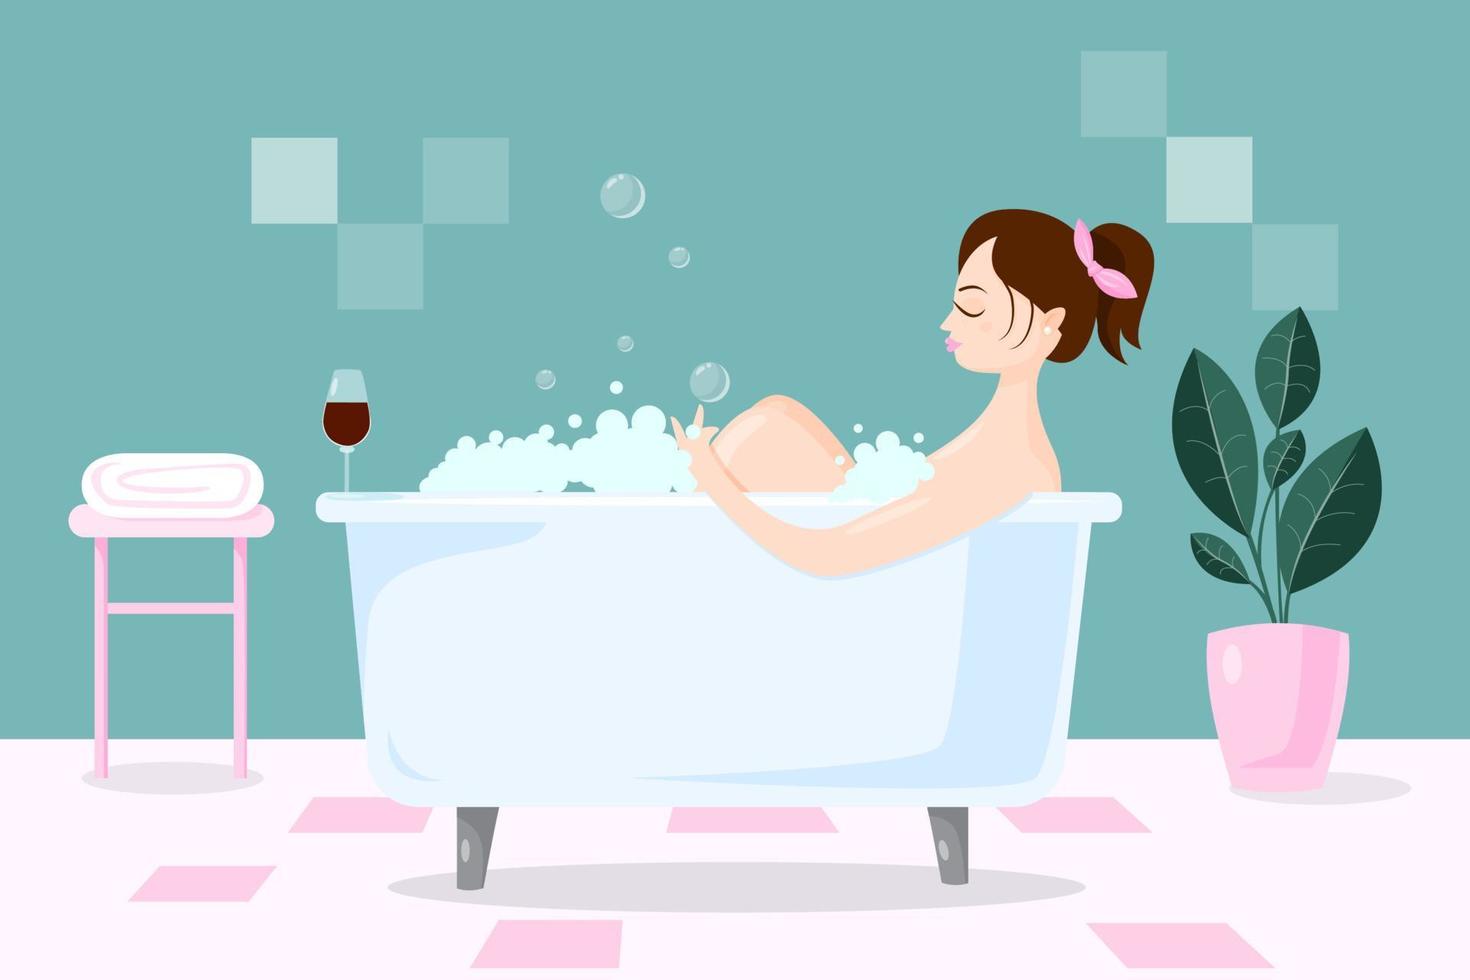 Pretty woman takes long bath and hugs her knees. Concept of relaxation, care and self love. Female character spends time with benefits for body. Vector illustration